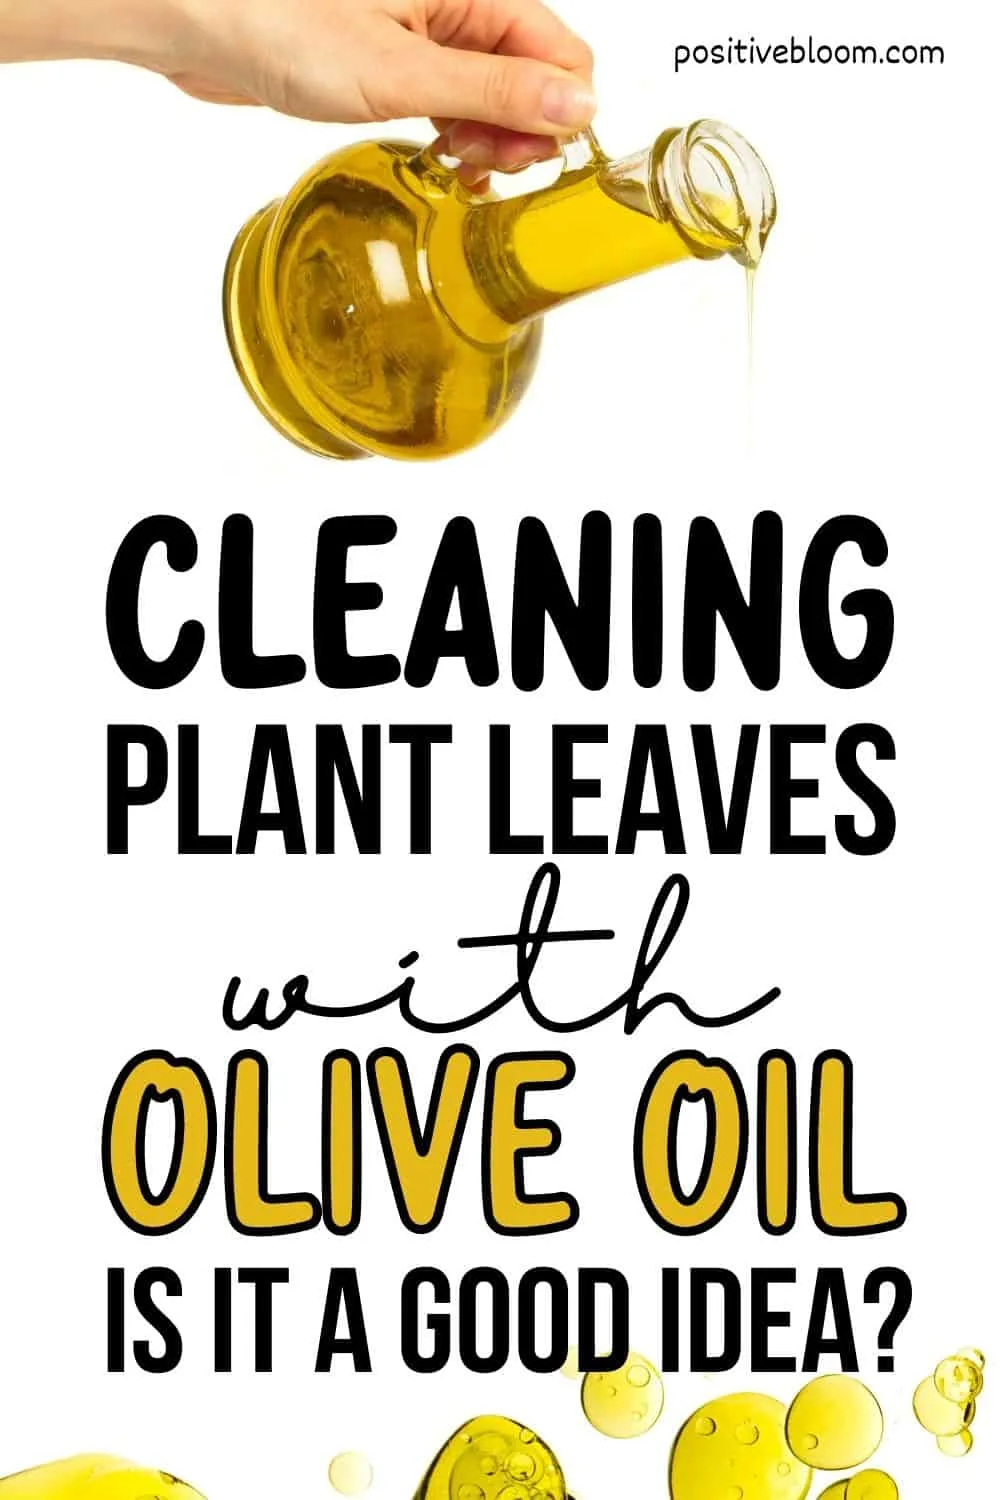 Cleaning Plant Leaves With Olive Oil Is It A Good Idea Pinterest